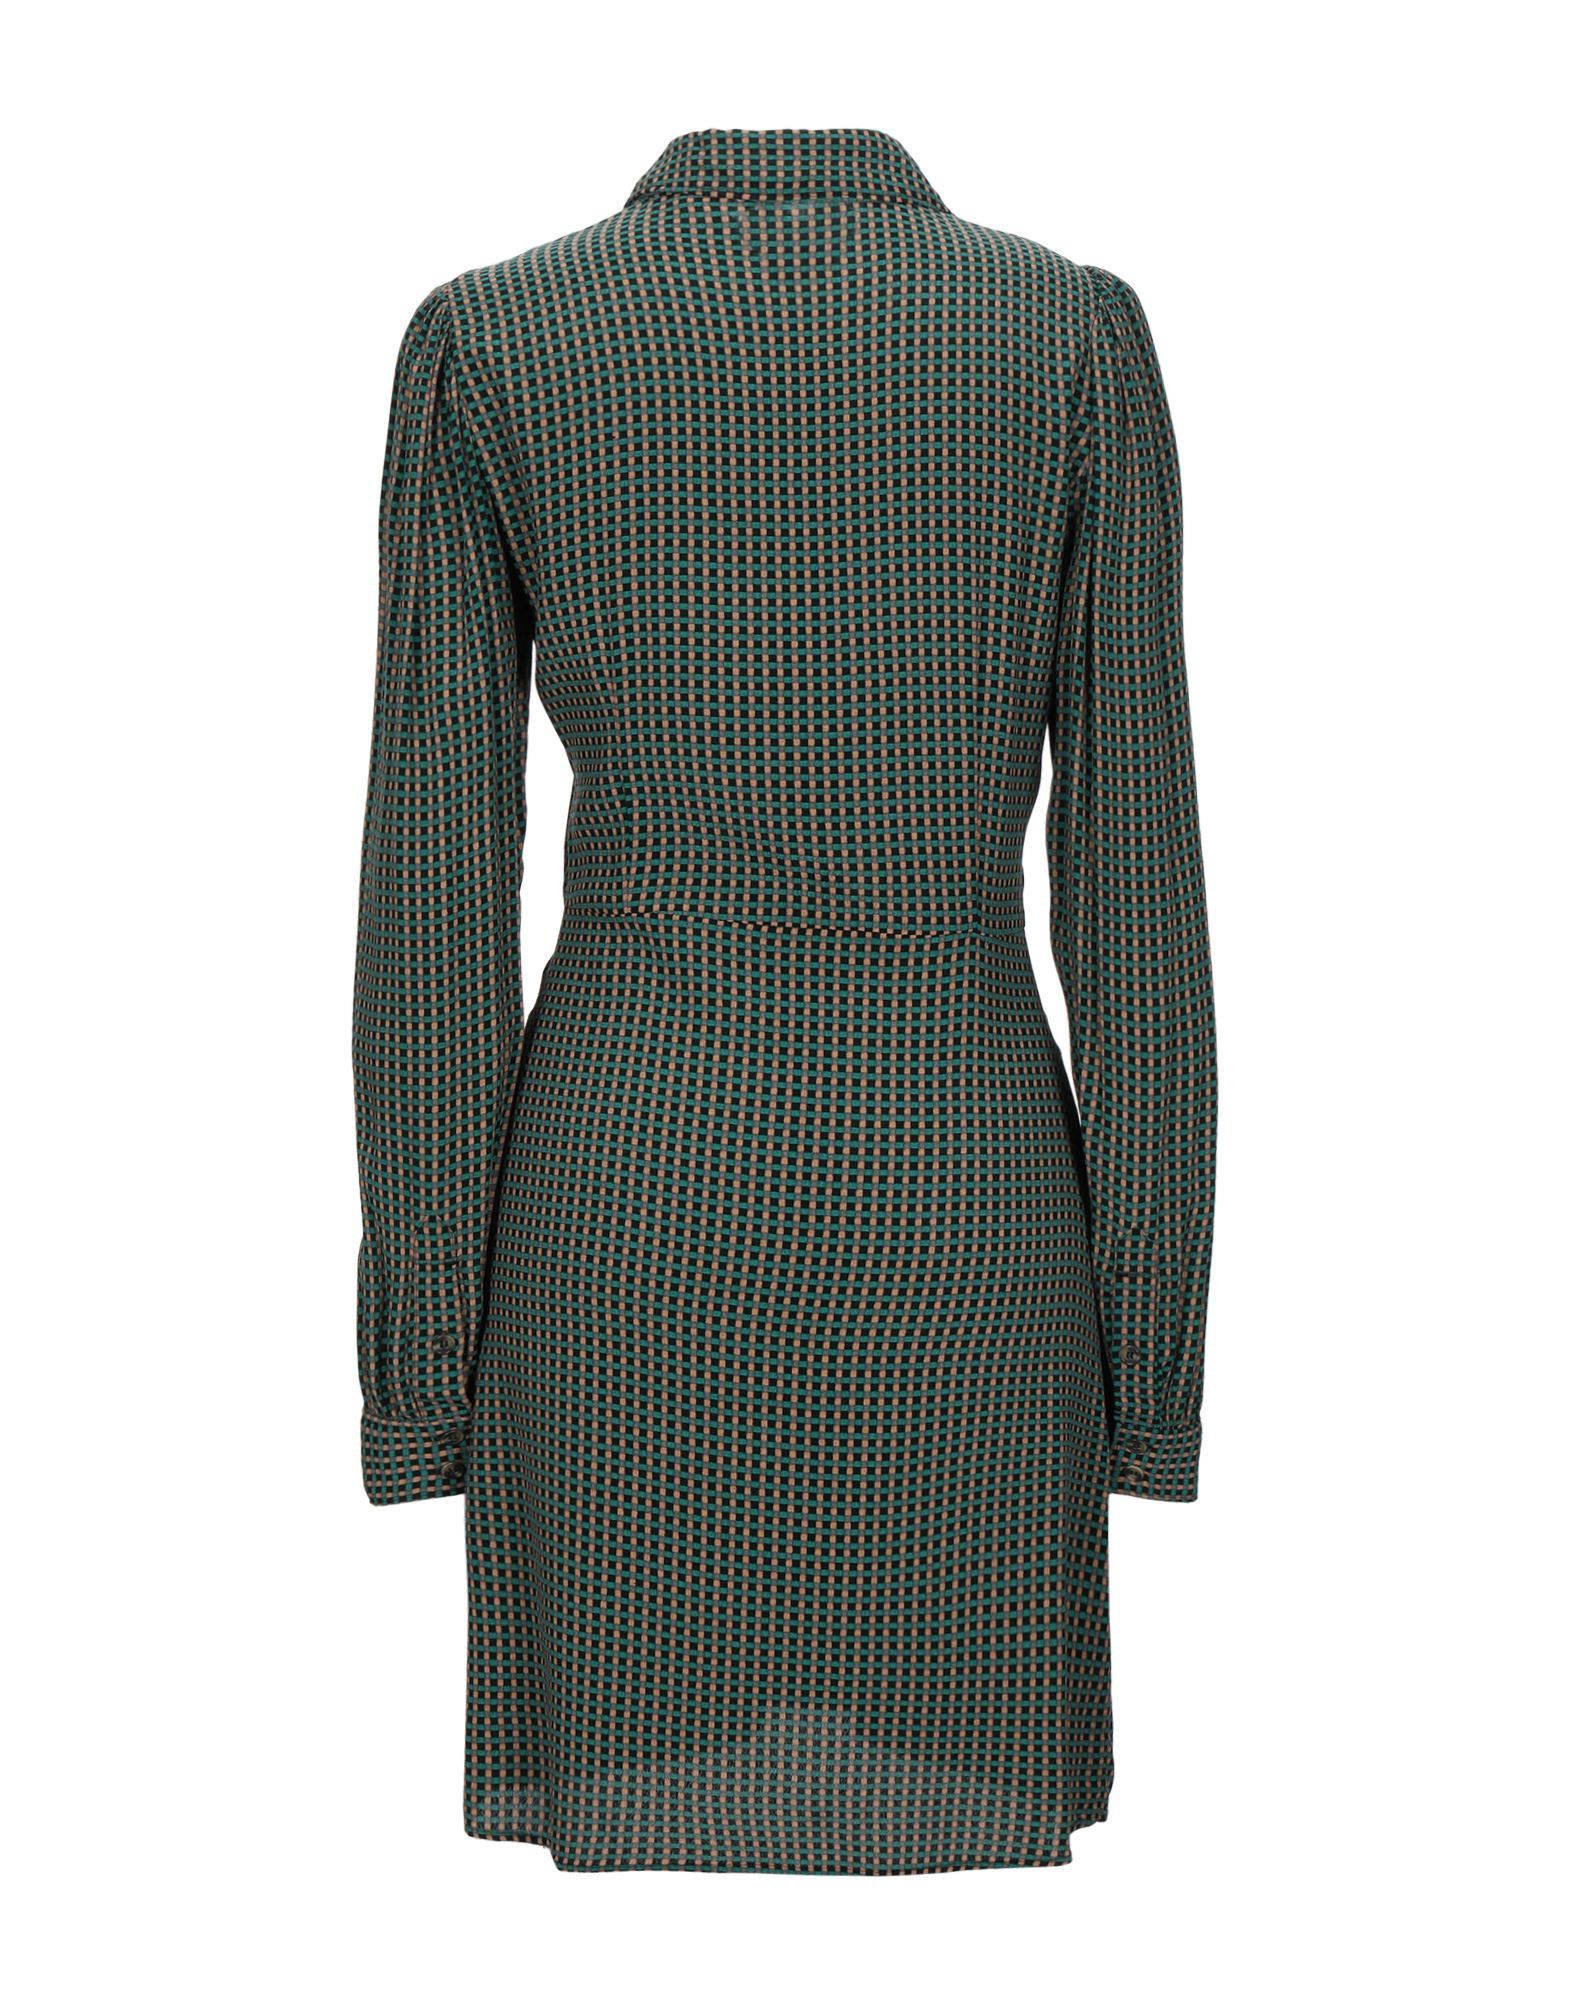 crepe, no appliqués, checked, classic neckline, long sleeves, no pockets, front closure, button closing, unlined